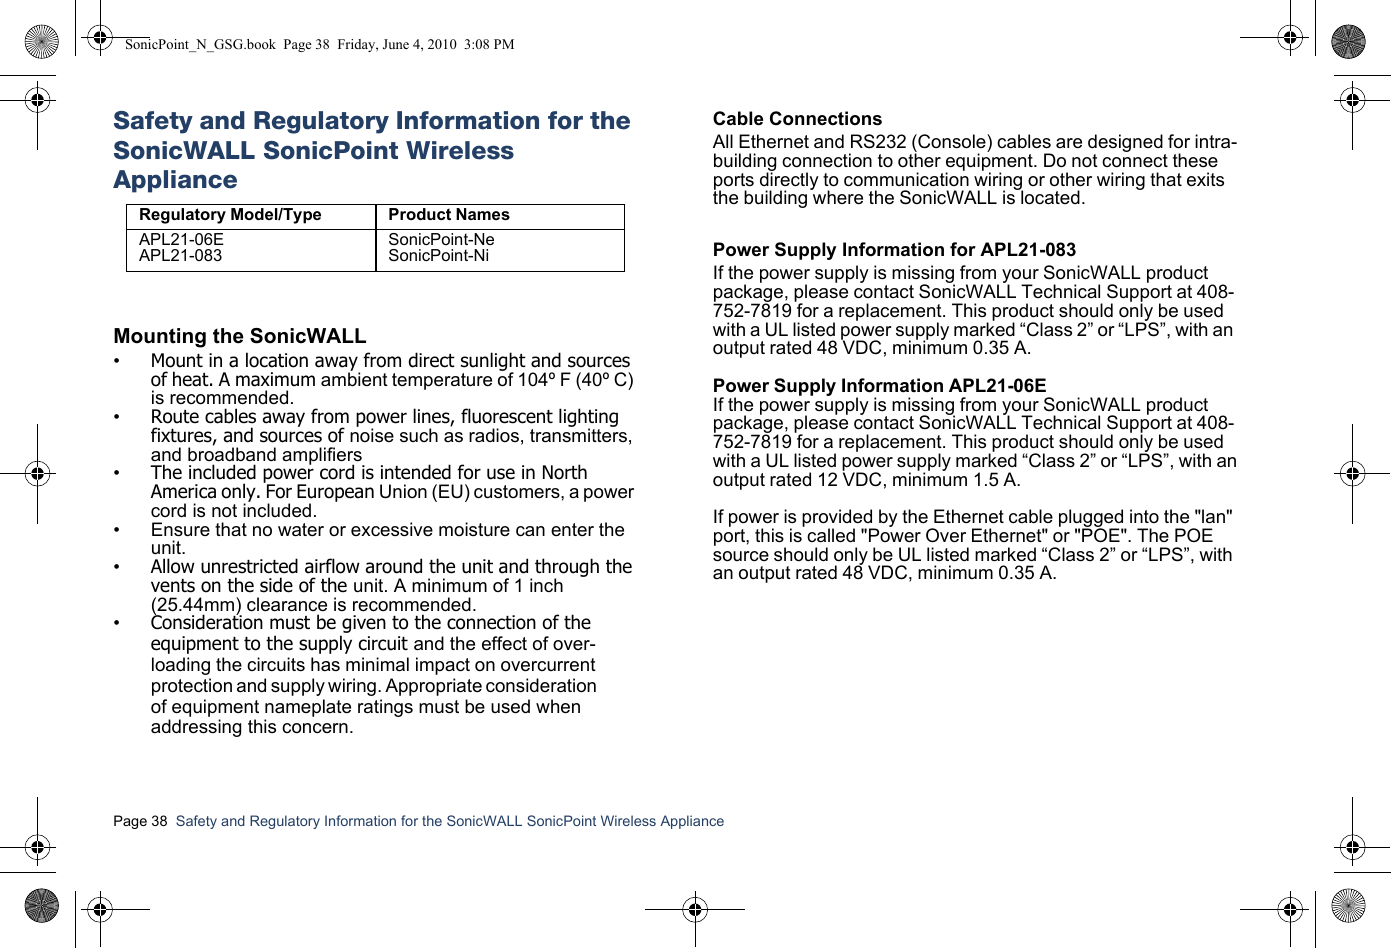 Page 38  Safety and Regulatory Information for the SonicWALL SonicPoint Wireless Appliance  Safety and Regulatory Information for the SonicWALL SonicPoint Wireless ApplianceMounting the SonicWALL•Mount in a location away from direct sunlight and sources of heat. A maximum ambient temperature of 104º F (40º C) is recommended.•Route cables away from power lines, fluorescent lighting fixtures, and sources of noise such as radios, transmitters, and broadband amplifiers•The included power cord is intended for use in North America only. For European Union (EU) customers, a power cord is not included.• Ensure that no water or excessive moisture can enter the unit.•Allow unrestricted airflow around the unit and through the vents on the side of the unit. A minimum of 1 inch (25.44mm) clearance is recommended.•Consideration must be given to the connection of the equipment to the supply circuit and the effect of over-loading the circuits has minimal impact on overcurrent protection and supply wiring. Appropriate consideration of equipment nameplate ratings must be used when addressing this concern.Cable ConnectionsAll Ethernet and RS232 (Console) cables are designed for intra-building connection to other equipment. Do not connect these ports directly to communication wiring or other wiring that exits the building where the SonicWALL is located. Power Supply Information for APL21-083If the power supply is missing from your SonicWALL product package, please contact SonicWALL Technical Support at 408-752-7819 for a replacement. This product should only be used with a UL listed power supply marked “Class 2” or “LPS”, with an output rated 48 VDC, minimum 0.35 A.Power Supply Information APL21-06EIf the power supply is missing from your SonicWALL productpackage, please contact SonicWALL Technical Support at 408-752-7819 for a replacement. This product should only be usedwith a UL listed power supply marked “Class 2” or “LPS”, with anoutput rated 12 VDC, minimum 1.5 A.If power is provided by the Ethernet cable plugged into the &quot;lan&quot; port, this is called &quot;Power Over Ethernet&quot; or &quot;POE&quot;. The POE source should only be UL listed marked “Class 2” or “LPS”, with an output rated 48 VDC, minimum 0.35 A. Regulatory Model/Type Product NamesAPL21-06EAPL21-083SonicPoint-NeSonicPoint-NiSonicPoint_N_GSG.book  Page 38  Friday, June 4, 2010  3:08 PM